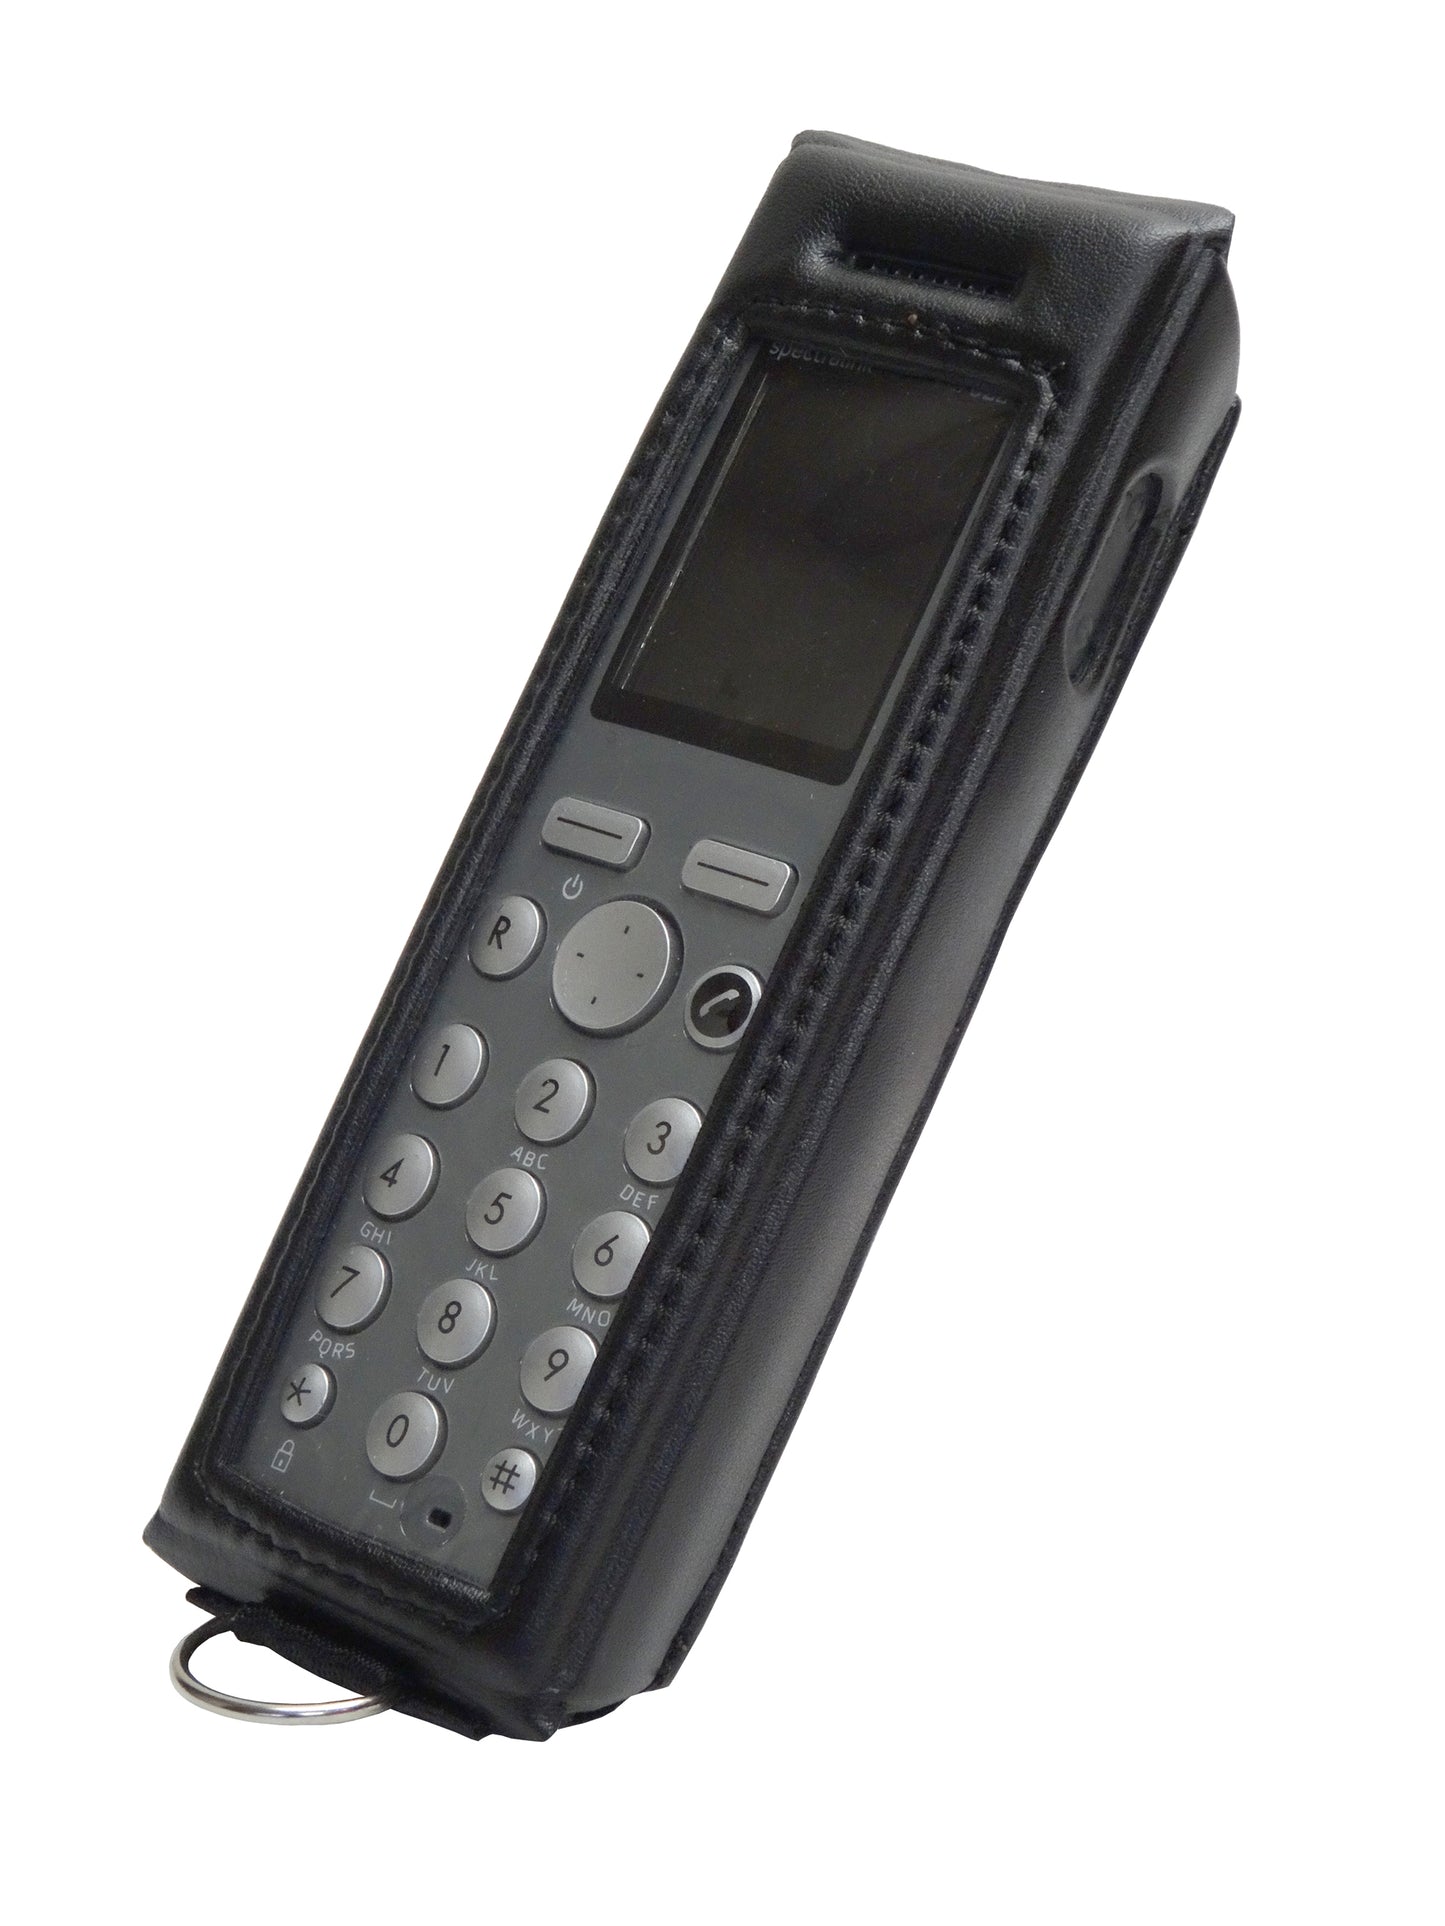 SpectraLink DECT case front right